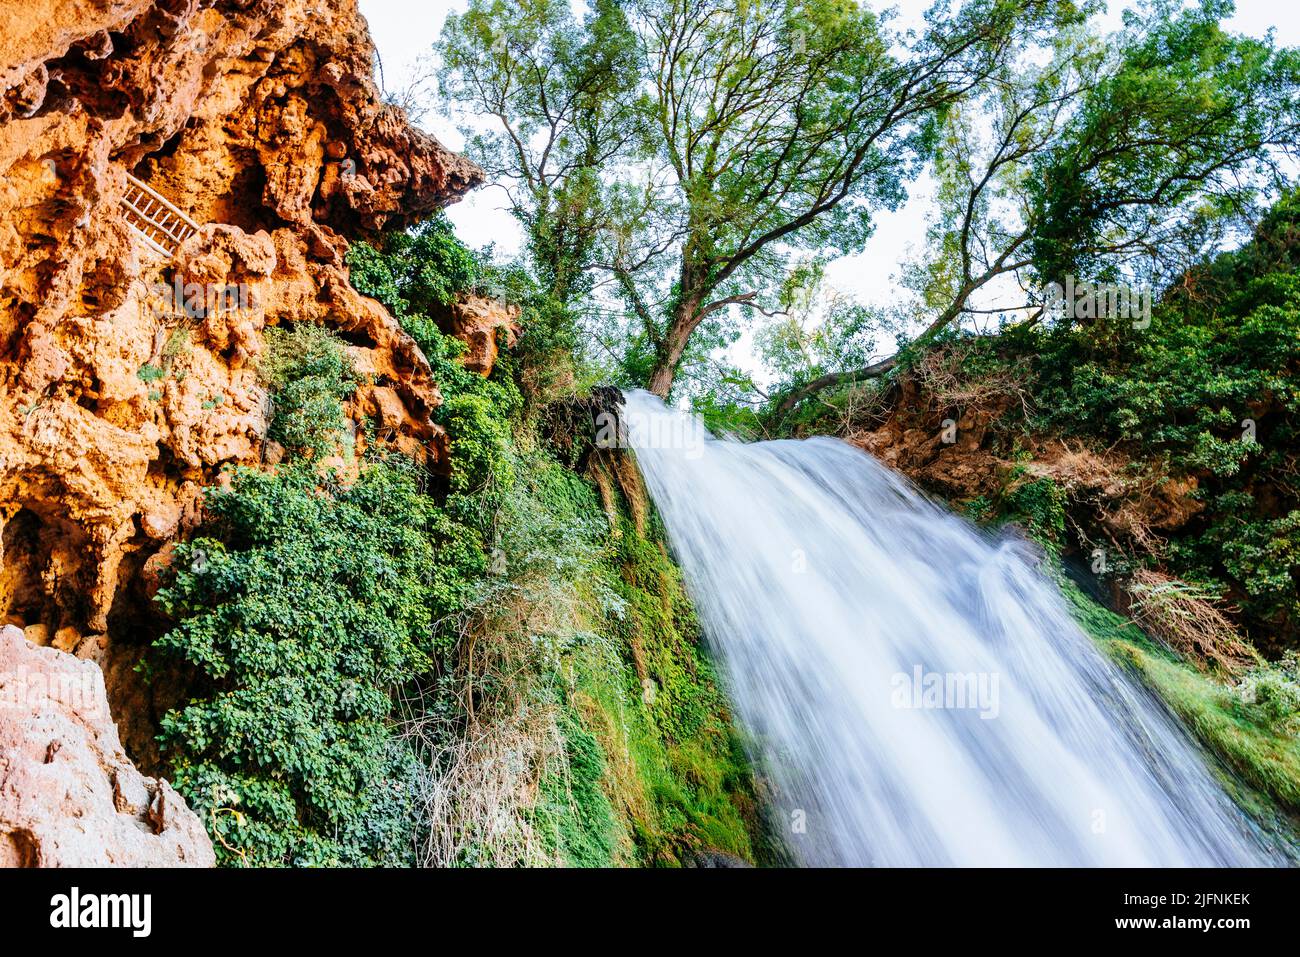 The waterfall called 'Cola de Caballo - Horsetail' with more than 50 meters is the highest in the Natural Park of the Monasterio de Piedra - Stone Mon Stock Photo